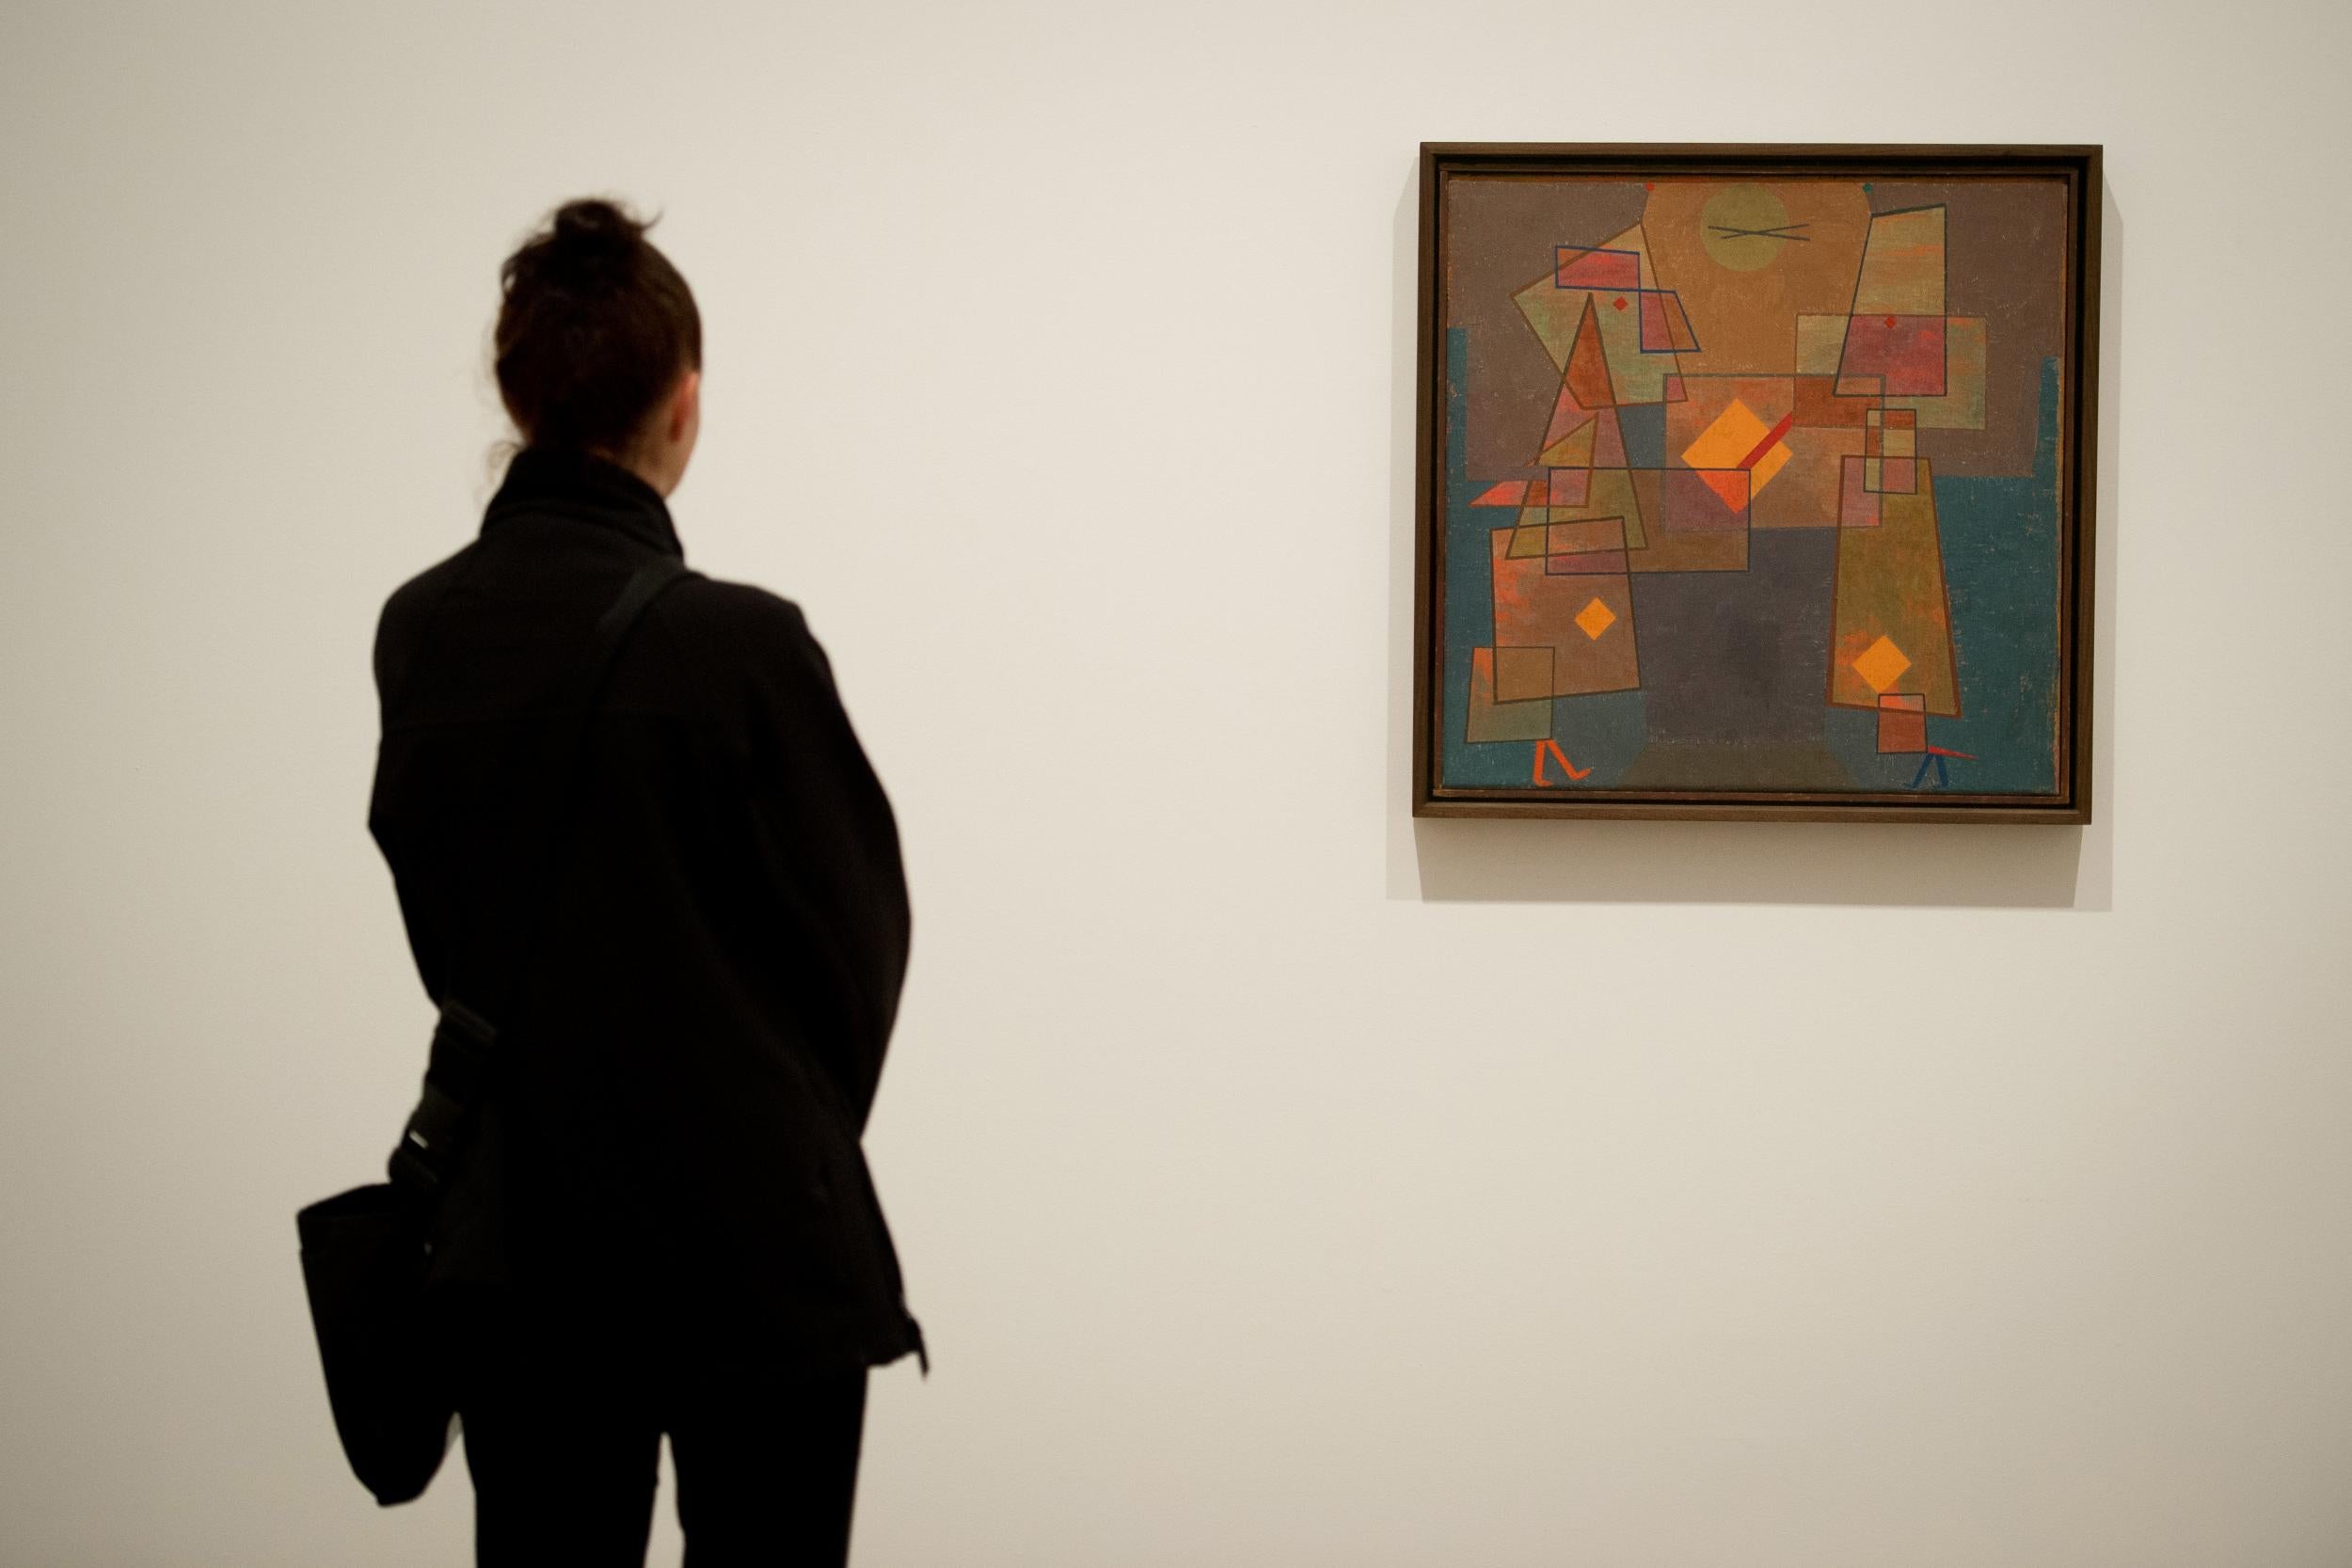 A woman stands beside a work entitled “Dispute” by Paul Klee at the press preview of an exhibition of his work, “Paul Klee: Making Visible” at the Tate Modern in London, England, on 14 October, 2013. (LEON NEAL/AFP/Getty Images)